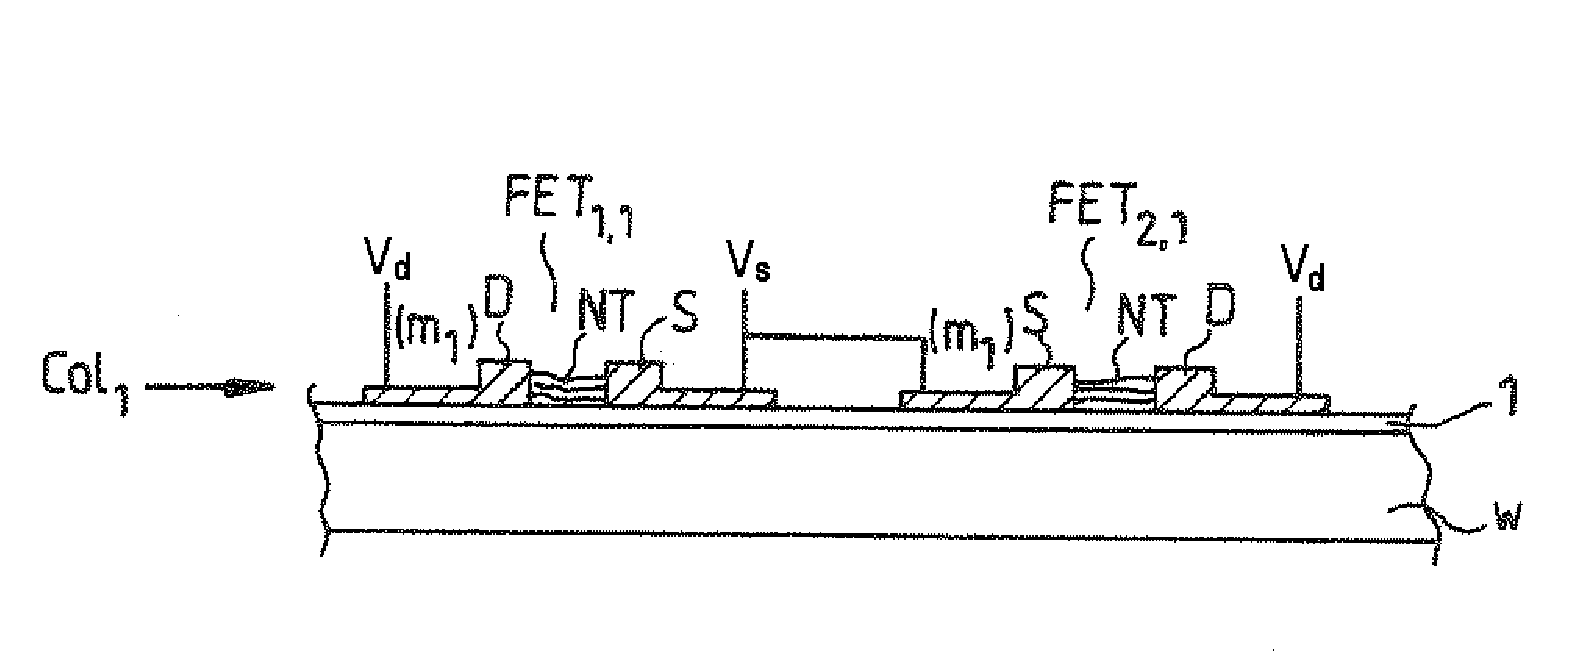 Array of Fet Transistors Having a Nanotube or Nanowire Semiconductor Element and Corresponding Electronic Device, For the Detection of Analytes